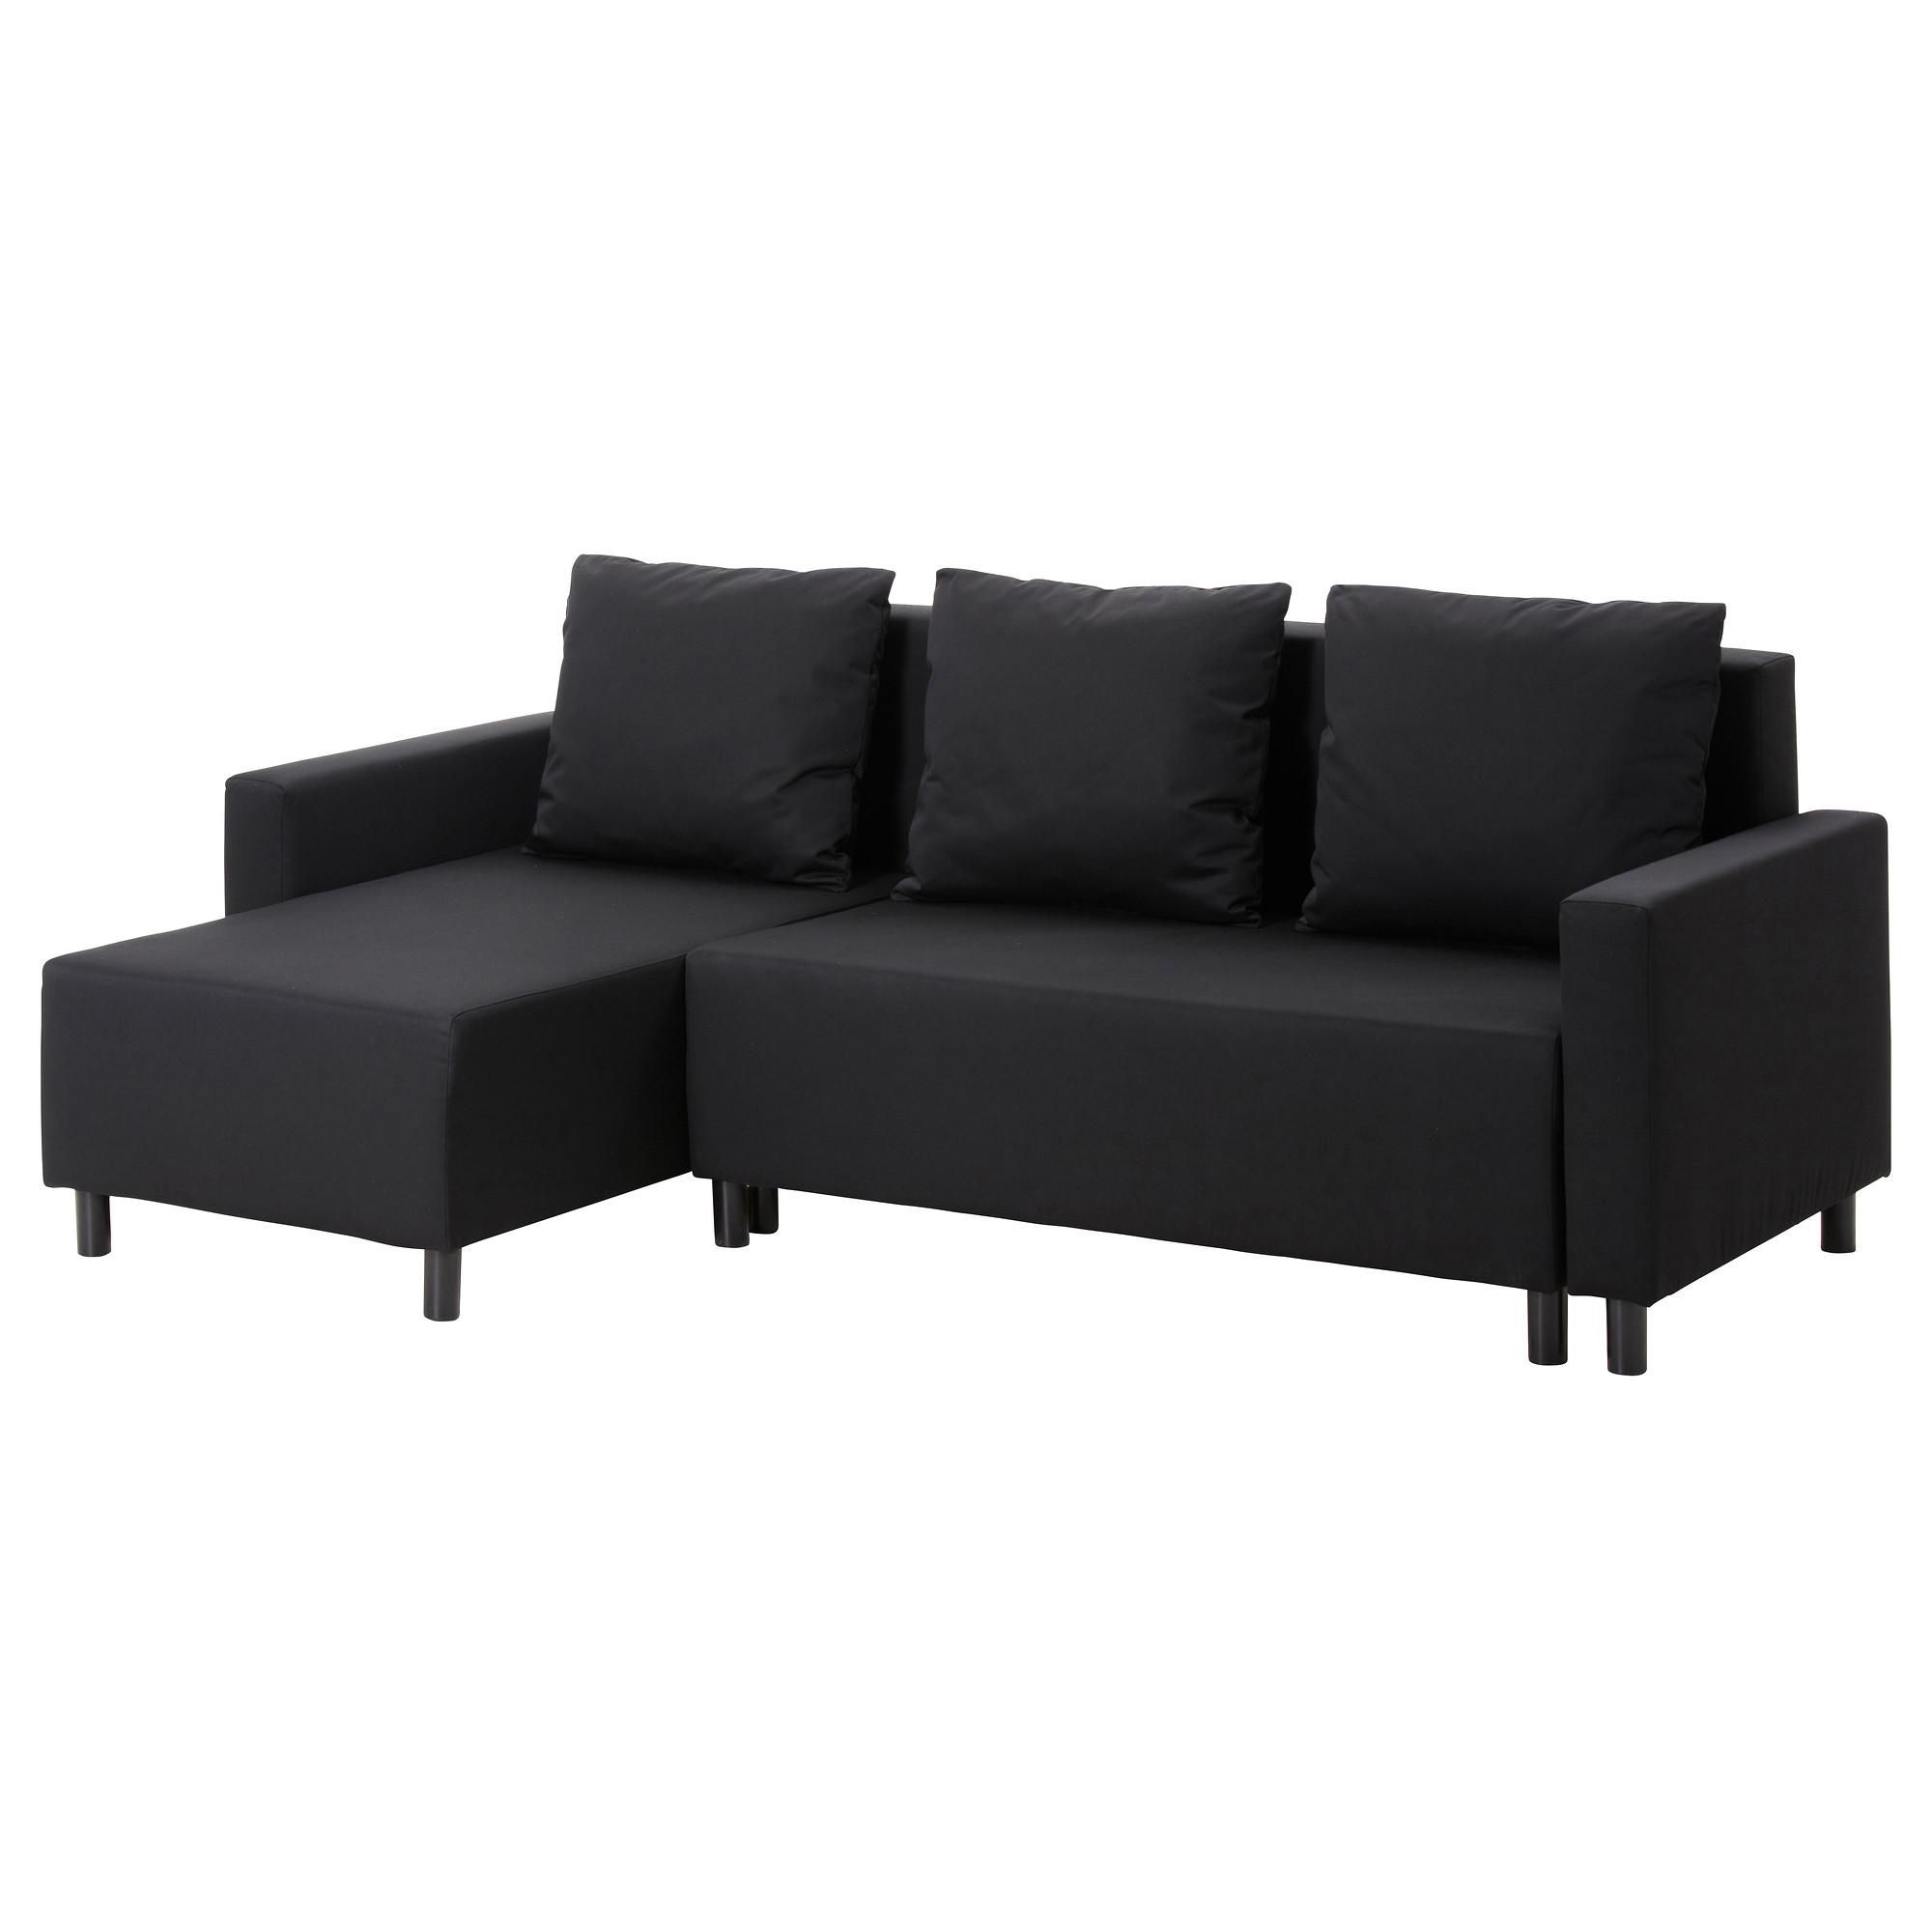 Sofa Beds & Futons – Ikea Intended For Ikea Sectional Sofa Bed (View 4 of 20)